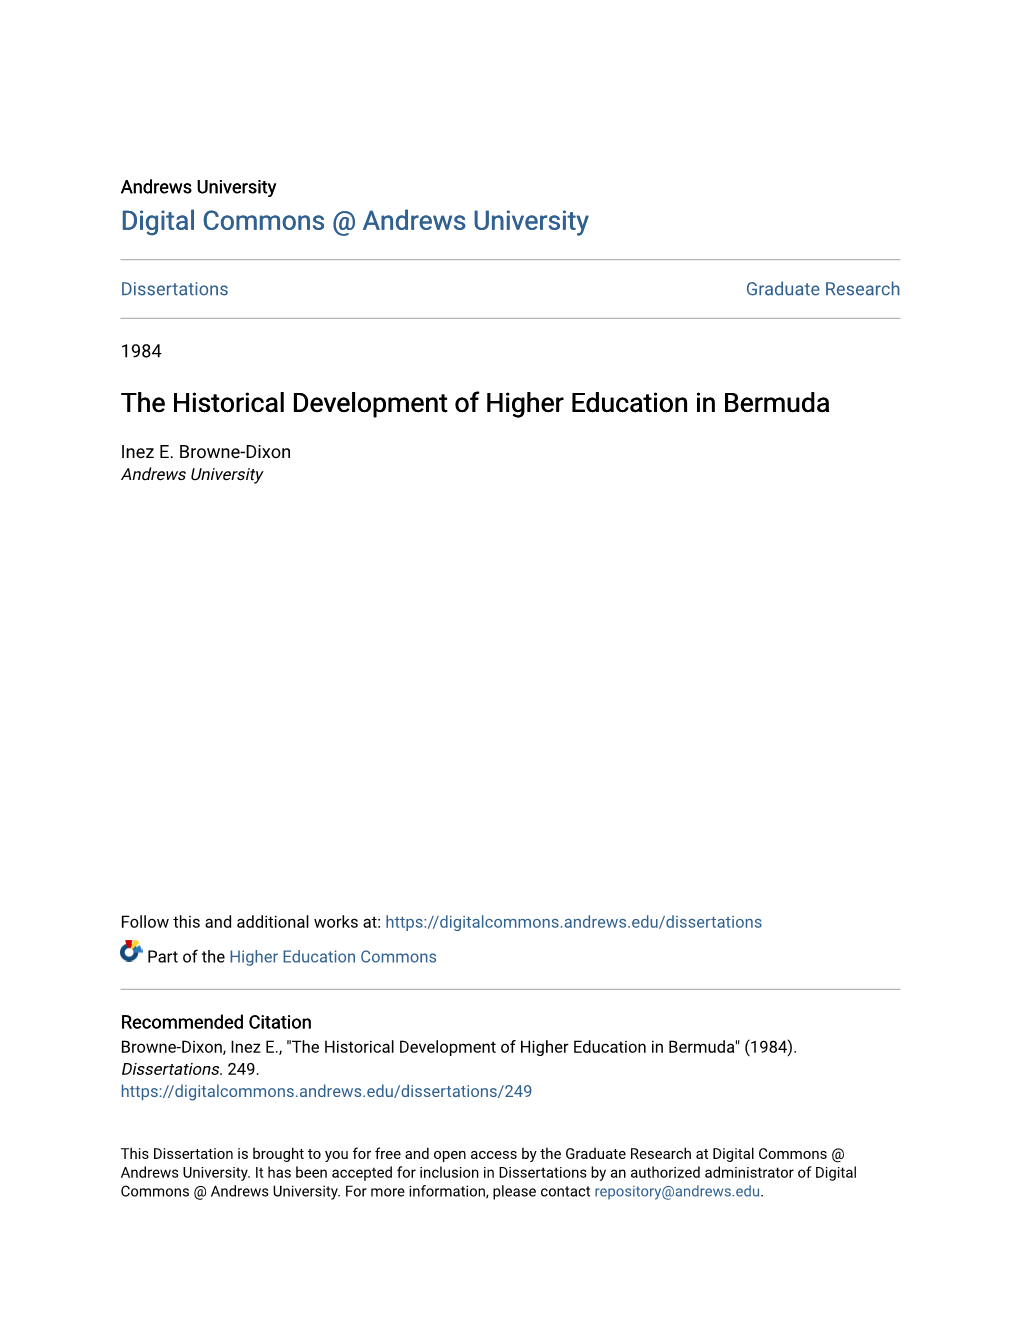 The Historical Development of Higher Education in Bermuda